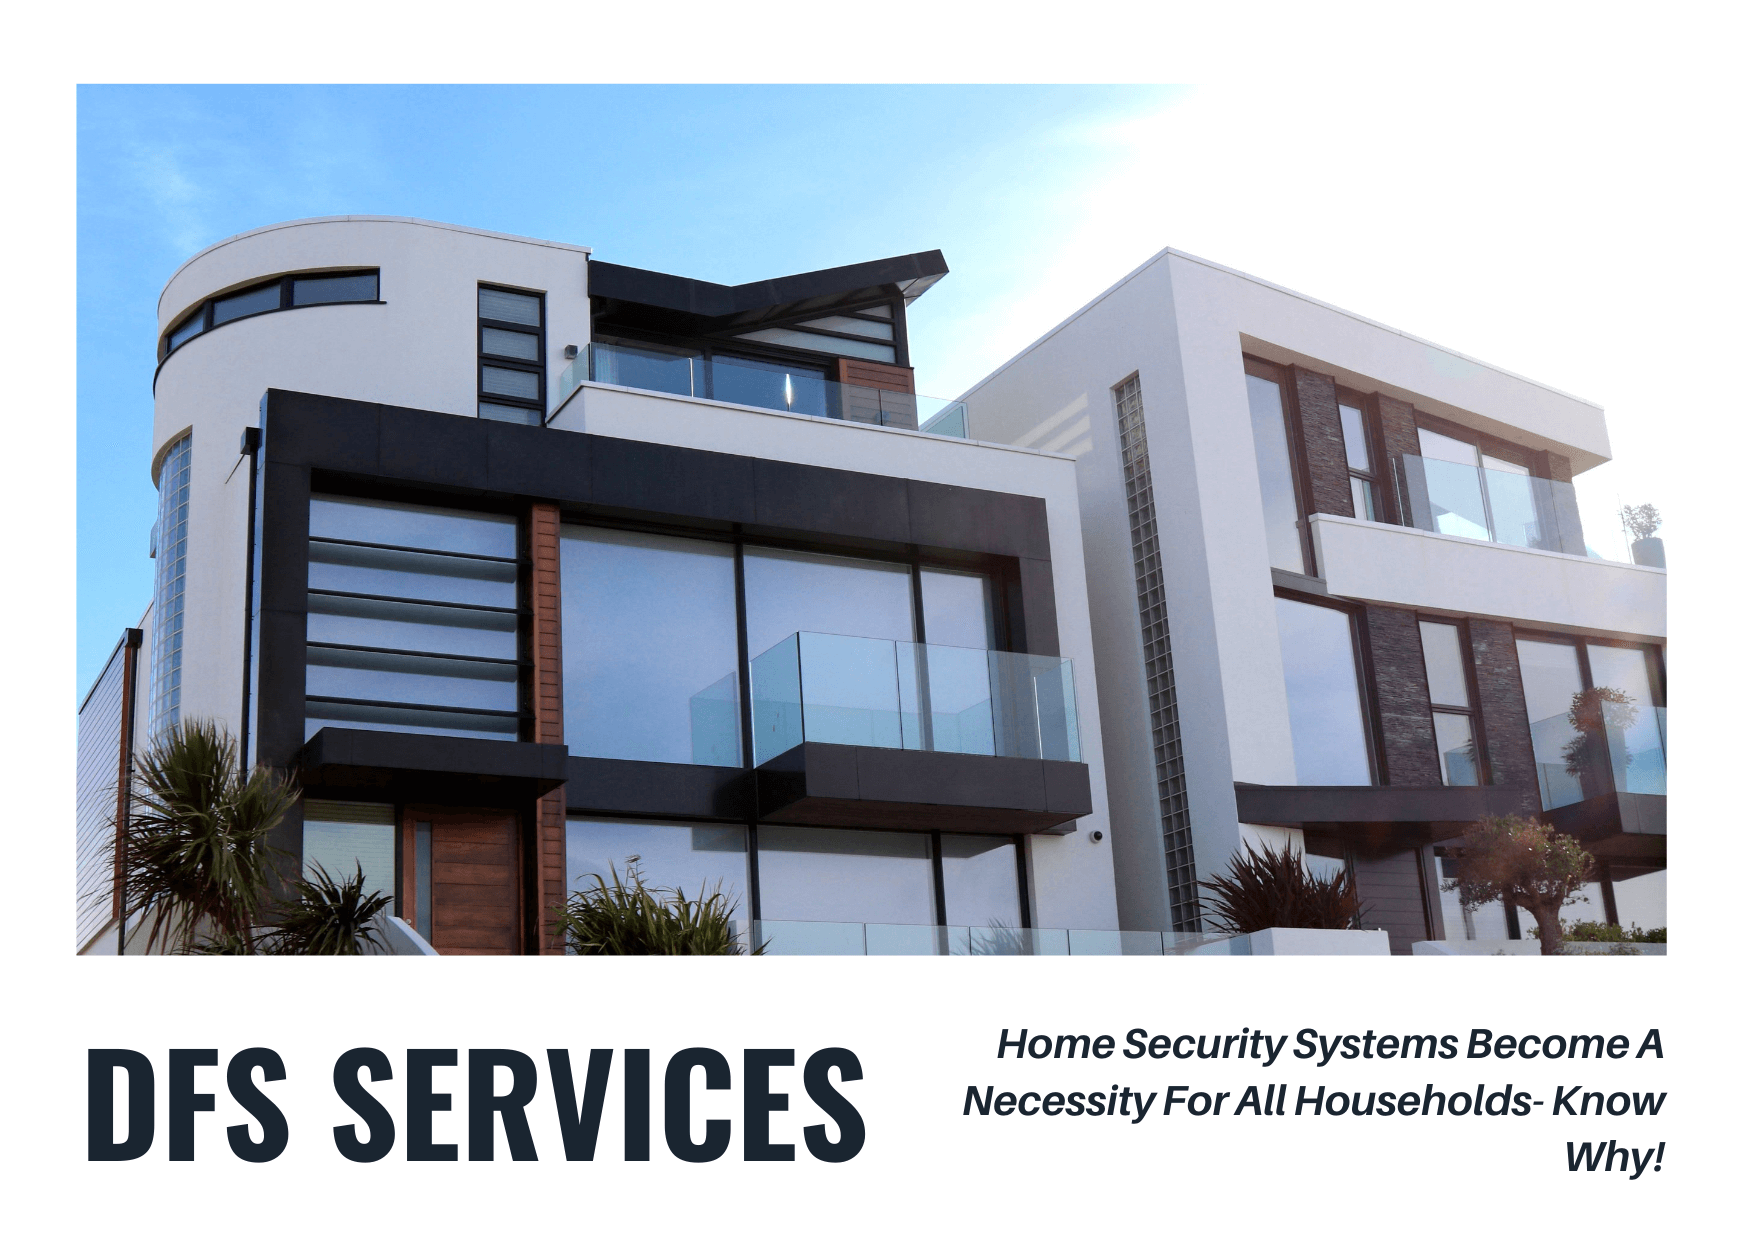 Why Home Security Systems Become A Necessity For All Households?